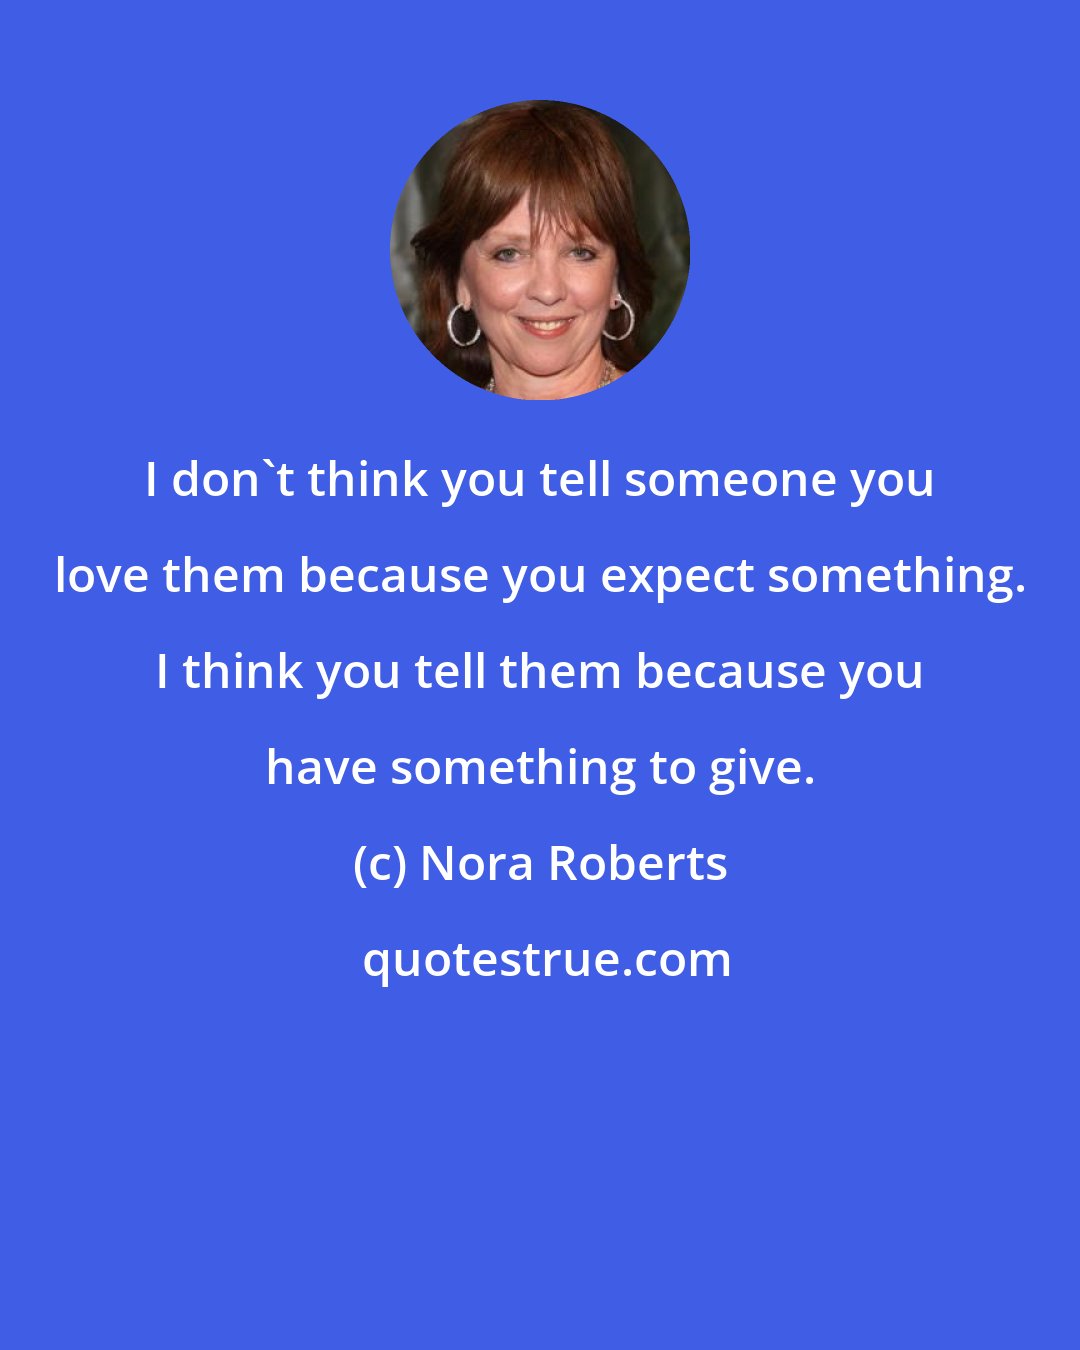 Nora Roberts: I don't think you tell someone you love them because you expect something. I think you tell them because you have something to give.